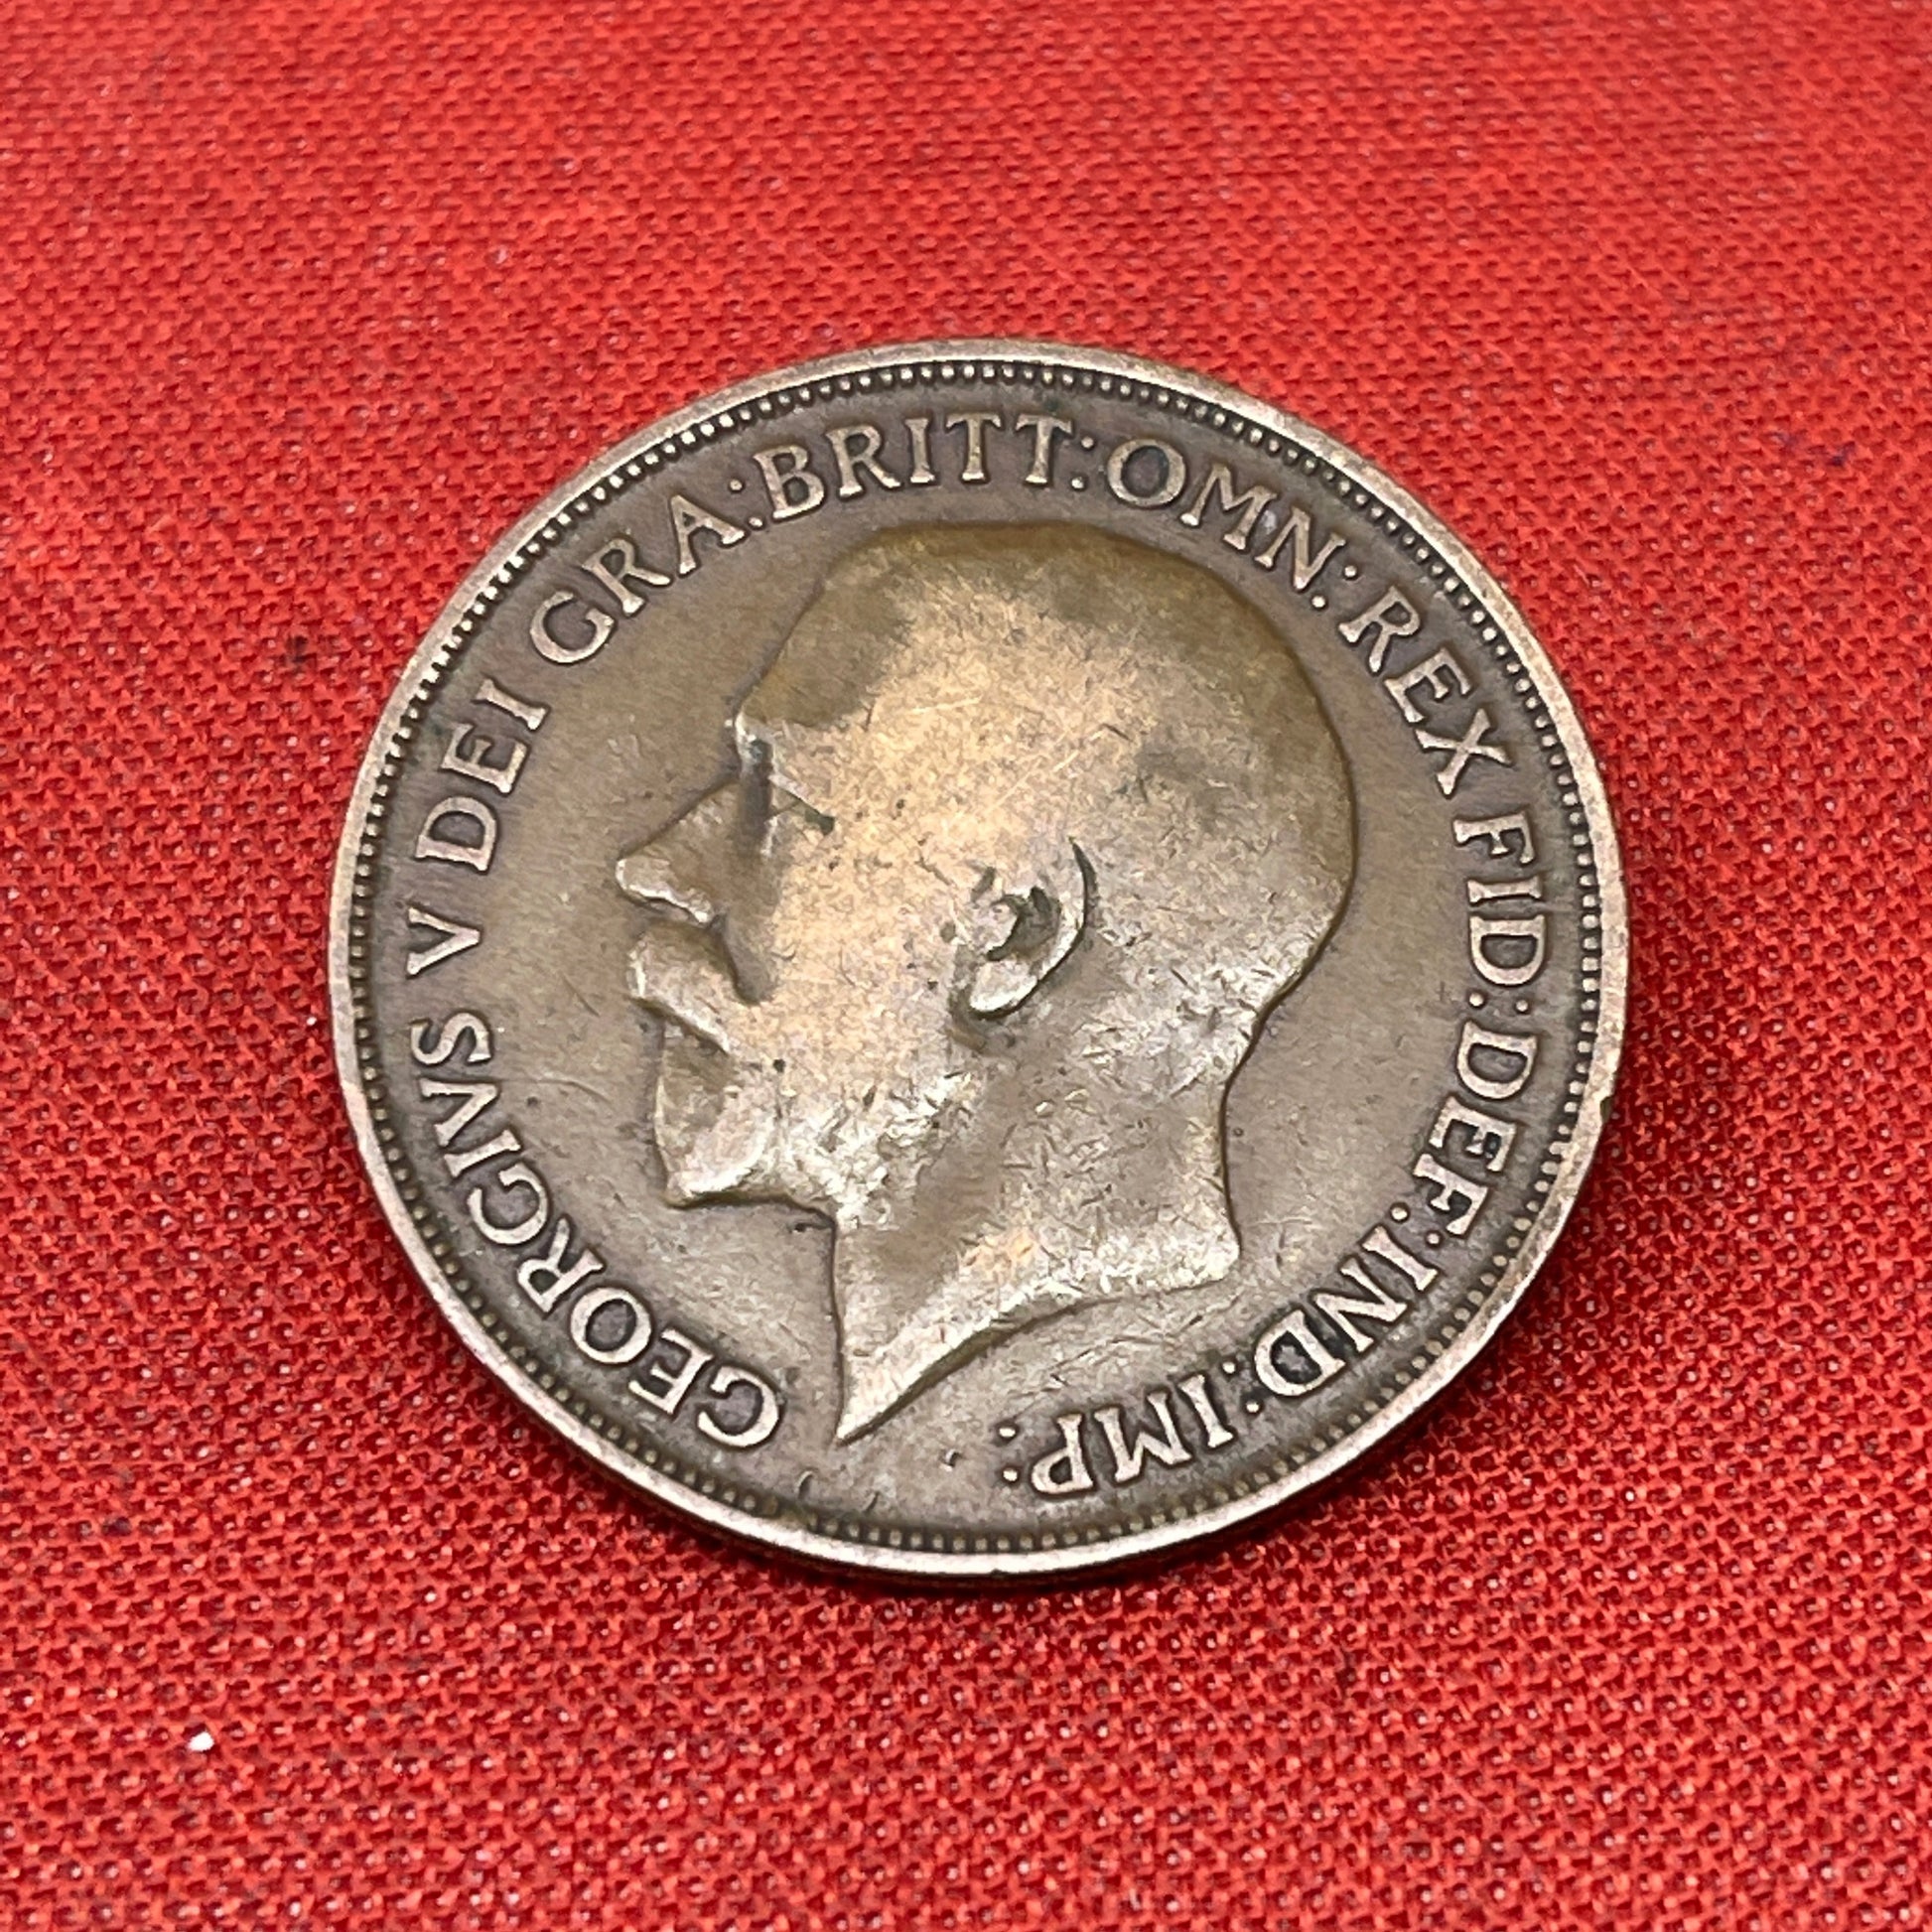 On the obverse side of the coin, you will find a portrait of King George V facing left, accompanied by the inscription "GEORGIVS V DEI GRA BRITT OMN REX FID DEF IND IMP." This Latin inscription translates to "George V by the Grace of God, King of all the Britains, Defender of the Faith, Emperor of India." The reverse side features the denomination "ONE PENNY and the year of minting.